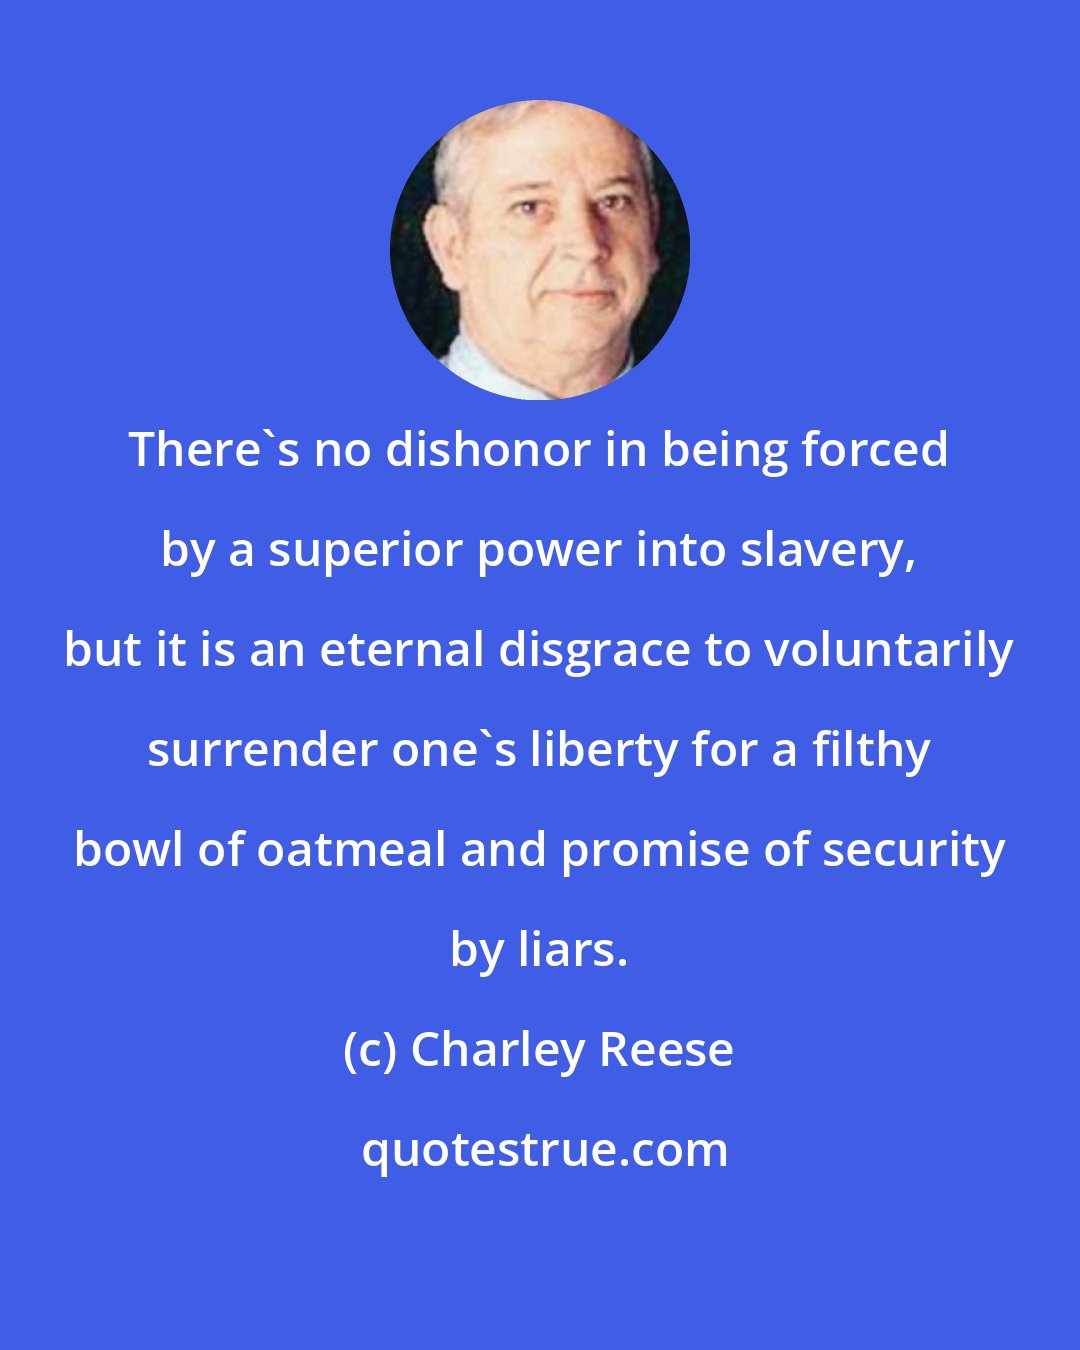 Charley Reese: There's no dishonor in being forced by a superior power into slavery, but it is an eternal disgrace to voluntarily surrender one's liberty for a filthy bowl of oatmeal and promise of security by liars.